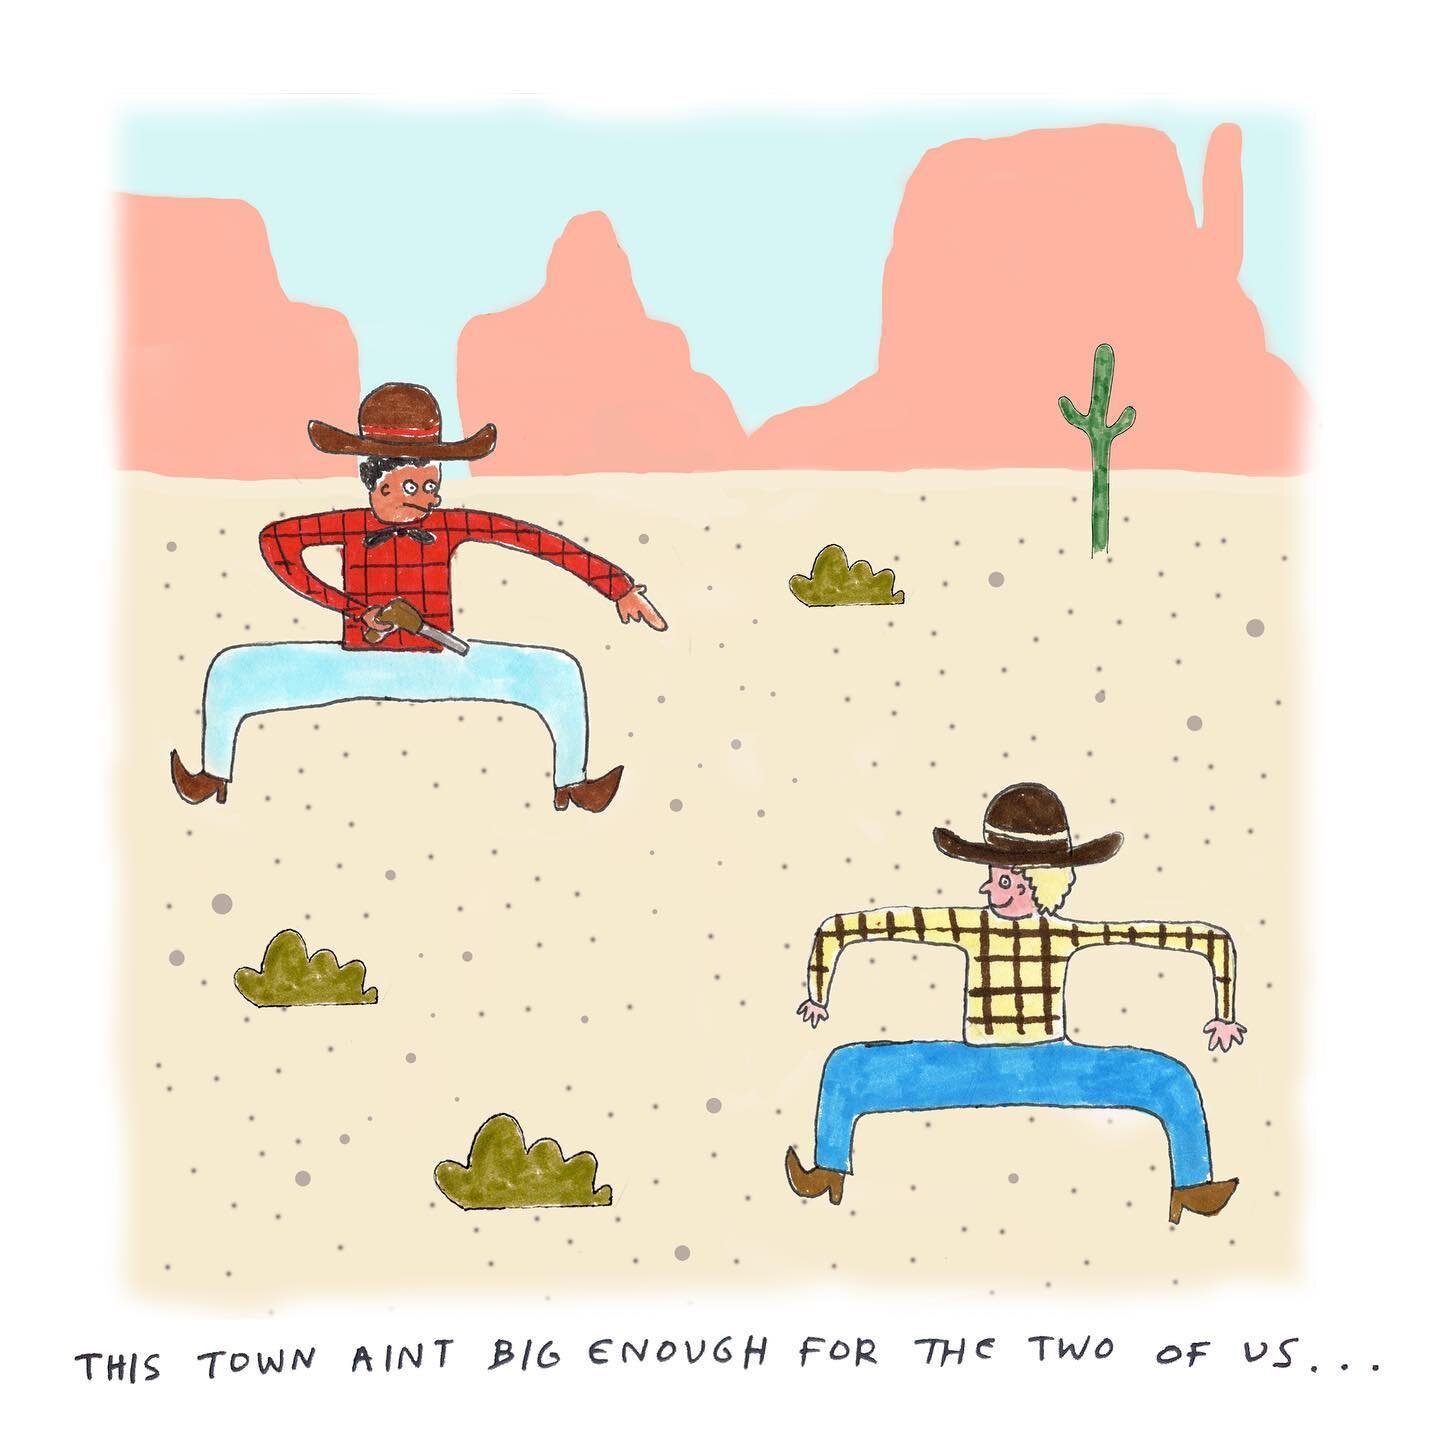 These cowboys had too much tumbleweed in their blood to settle for a heteronormative experience on the western frontier 

#queer #gayart #gaycowboy #cowboyart #americana #digitalillustration #tombow #mixedmedia #illustration #monumentvalley